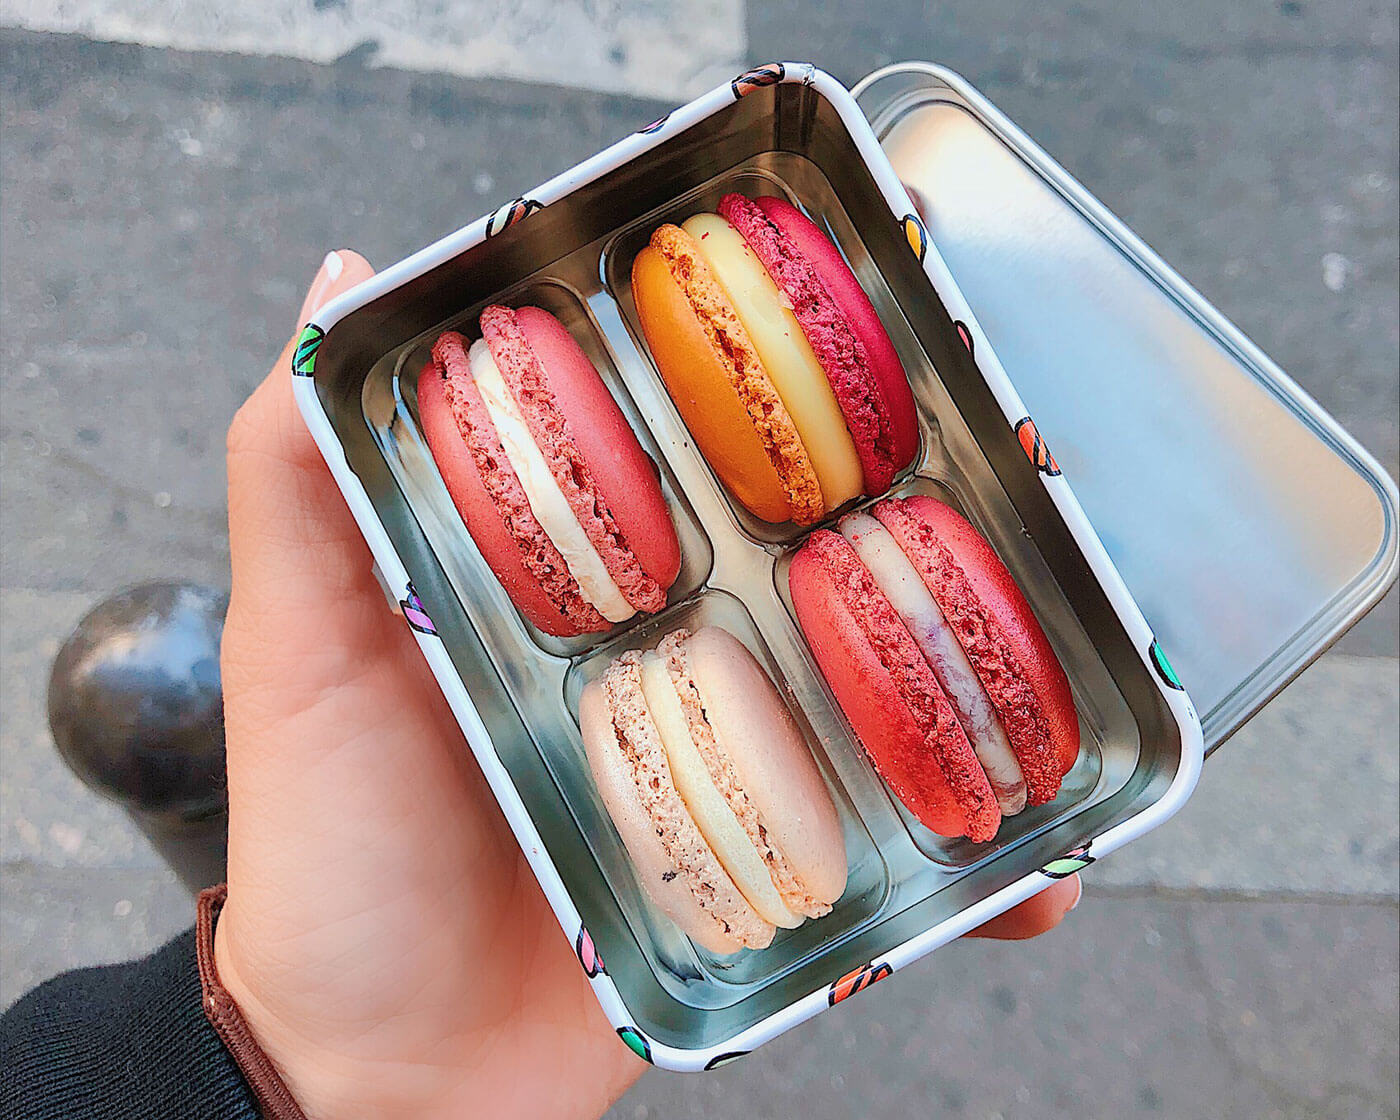 A set of 4 Pierre Herme macarons